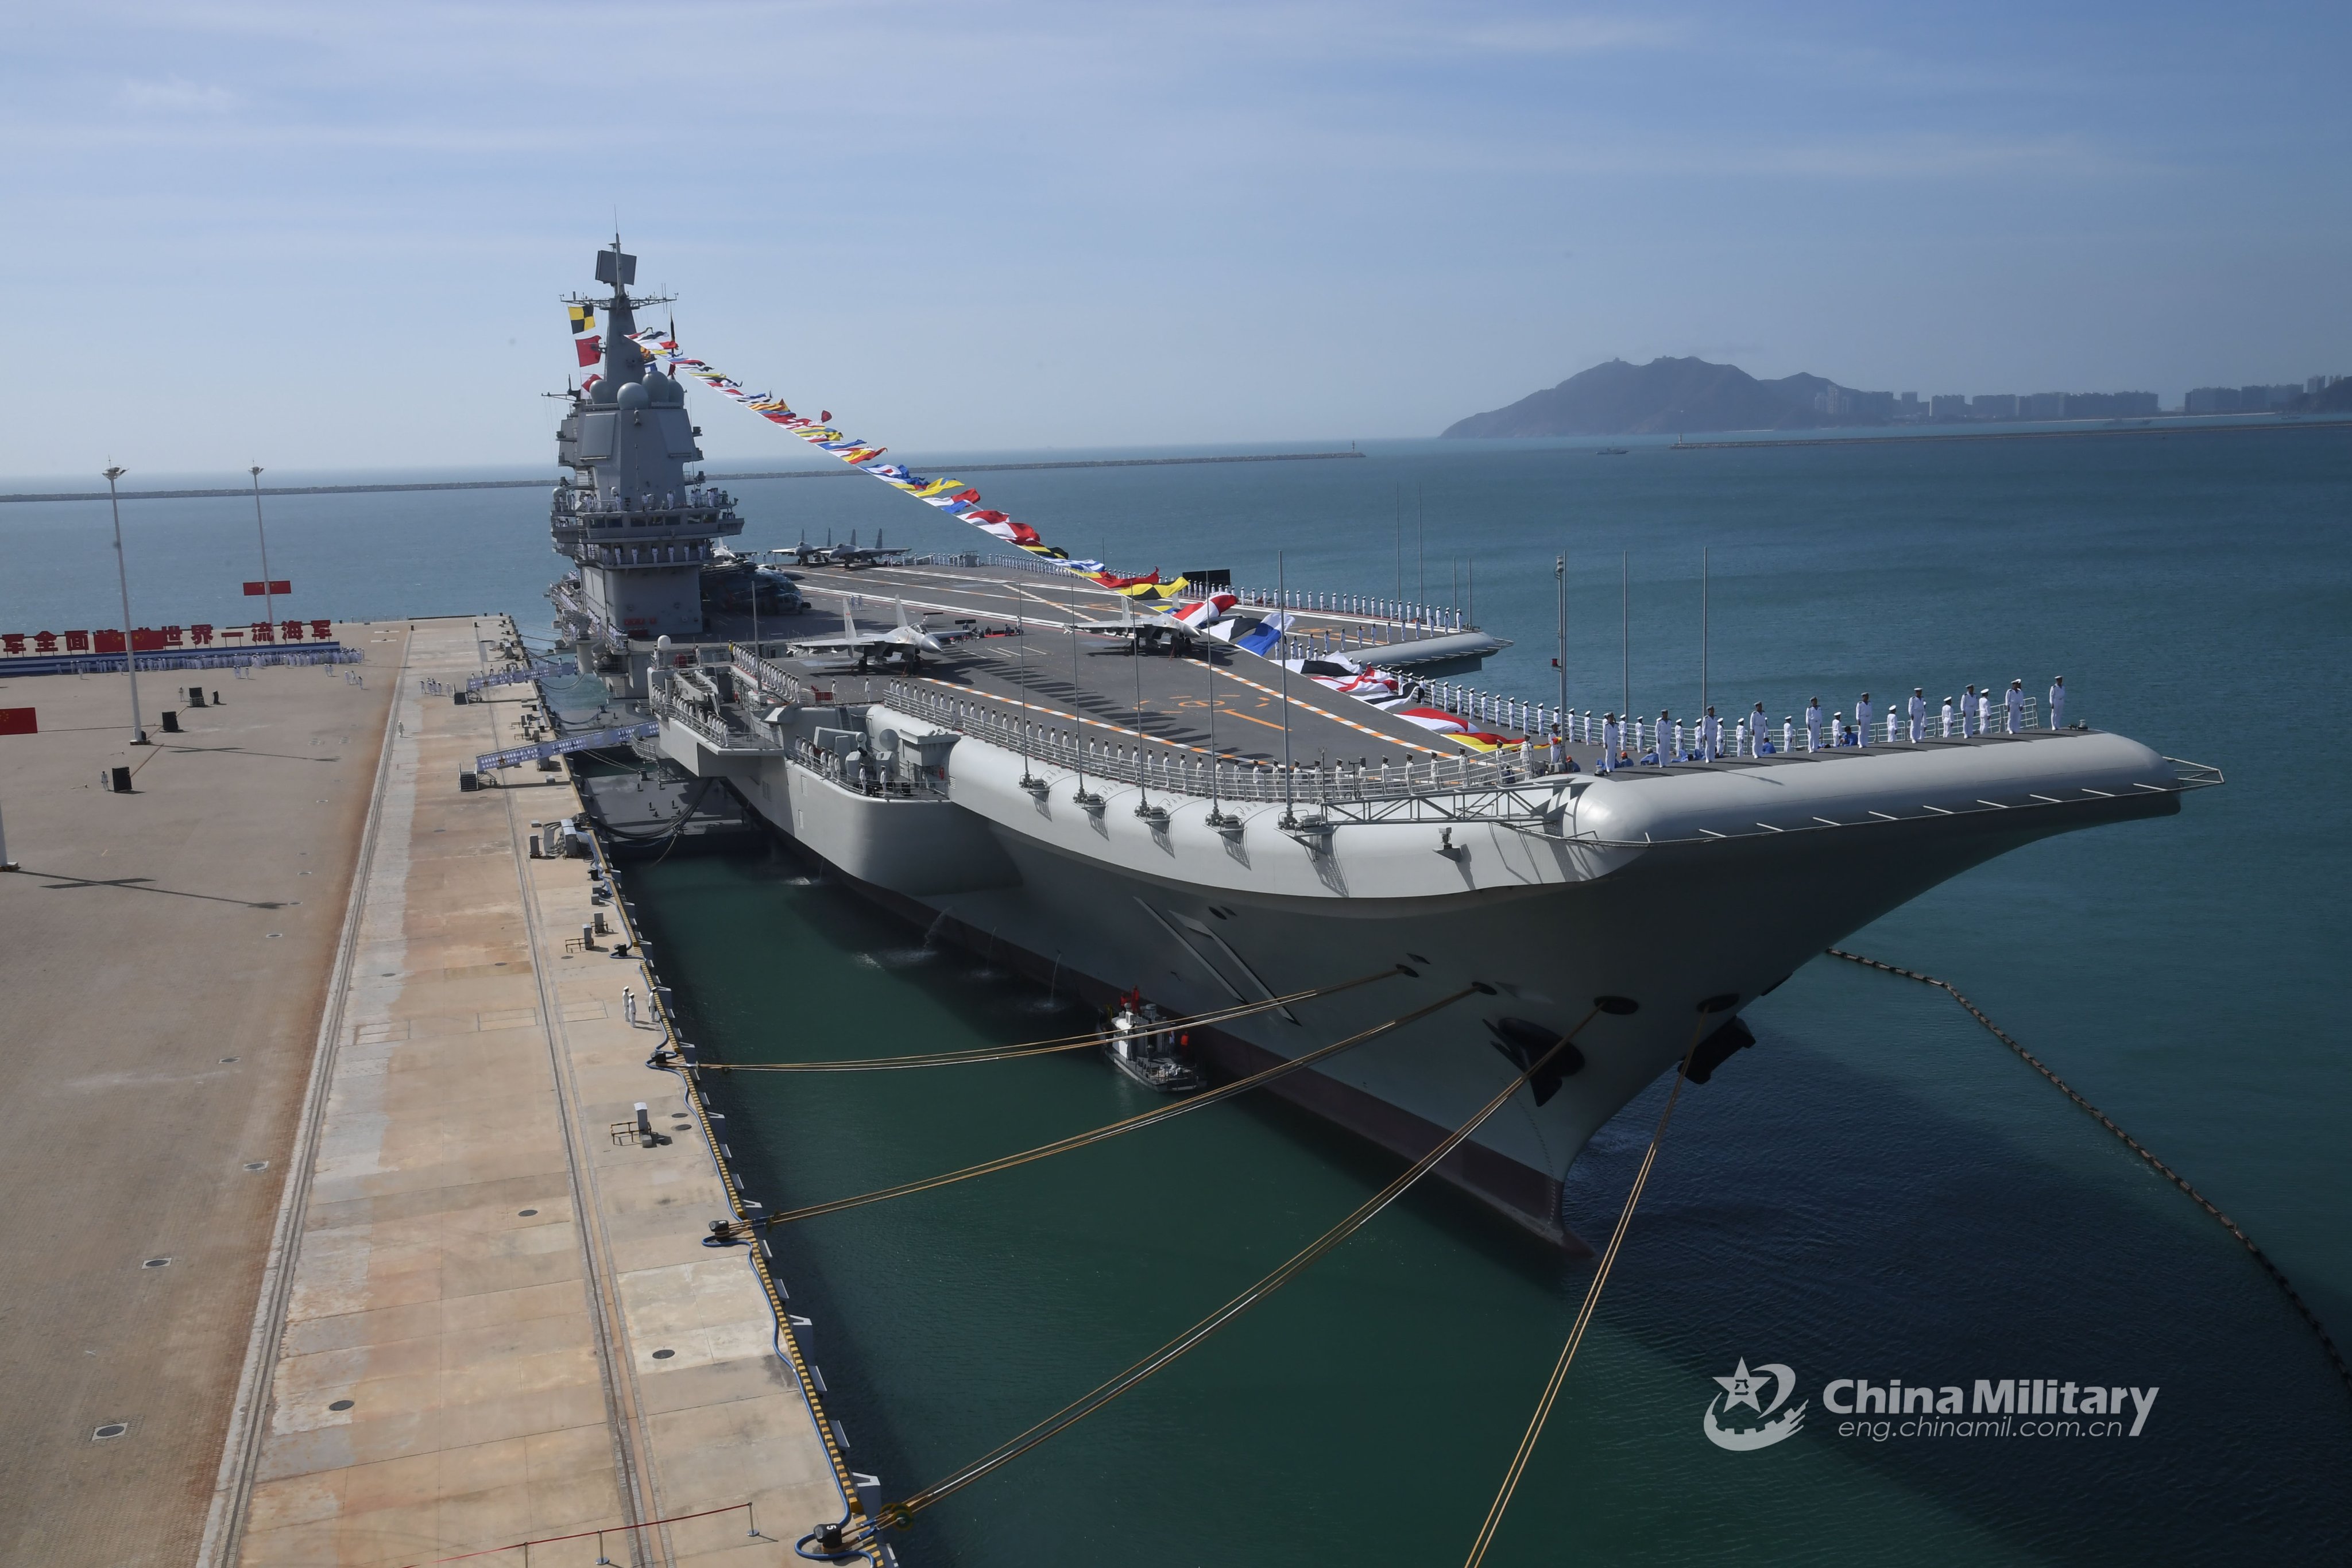 Rupprecht_A on Twitter: "New images of the PLAN aircraft carrier 'Shandong' (CV-17) appeared at her naval port in Sanya during or after the official commissioning on 17th December 2019. (Images by Feng